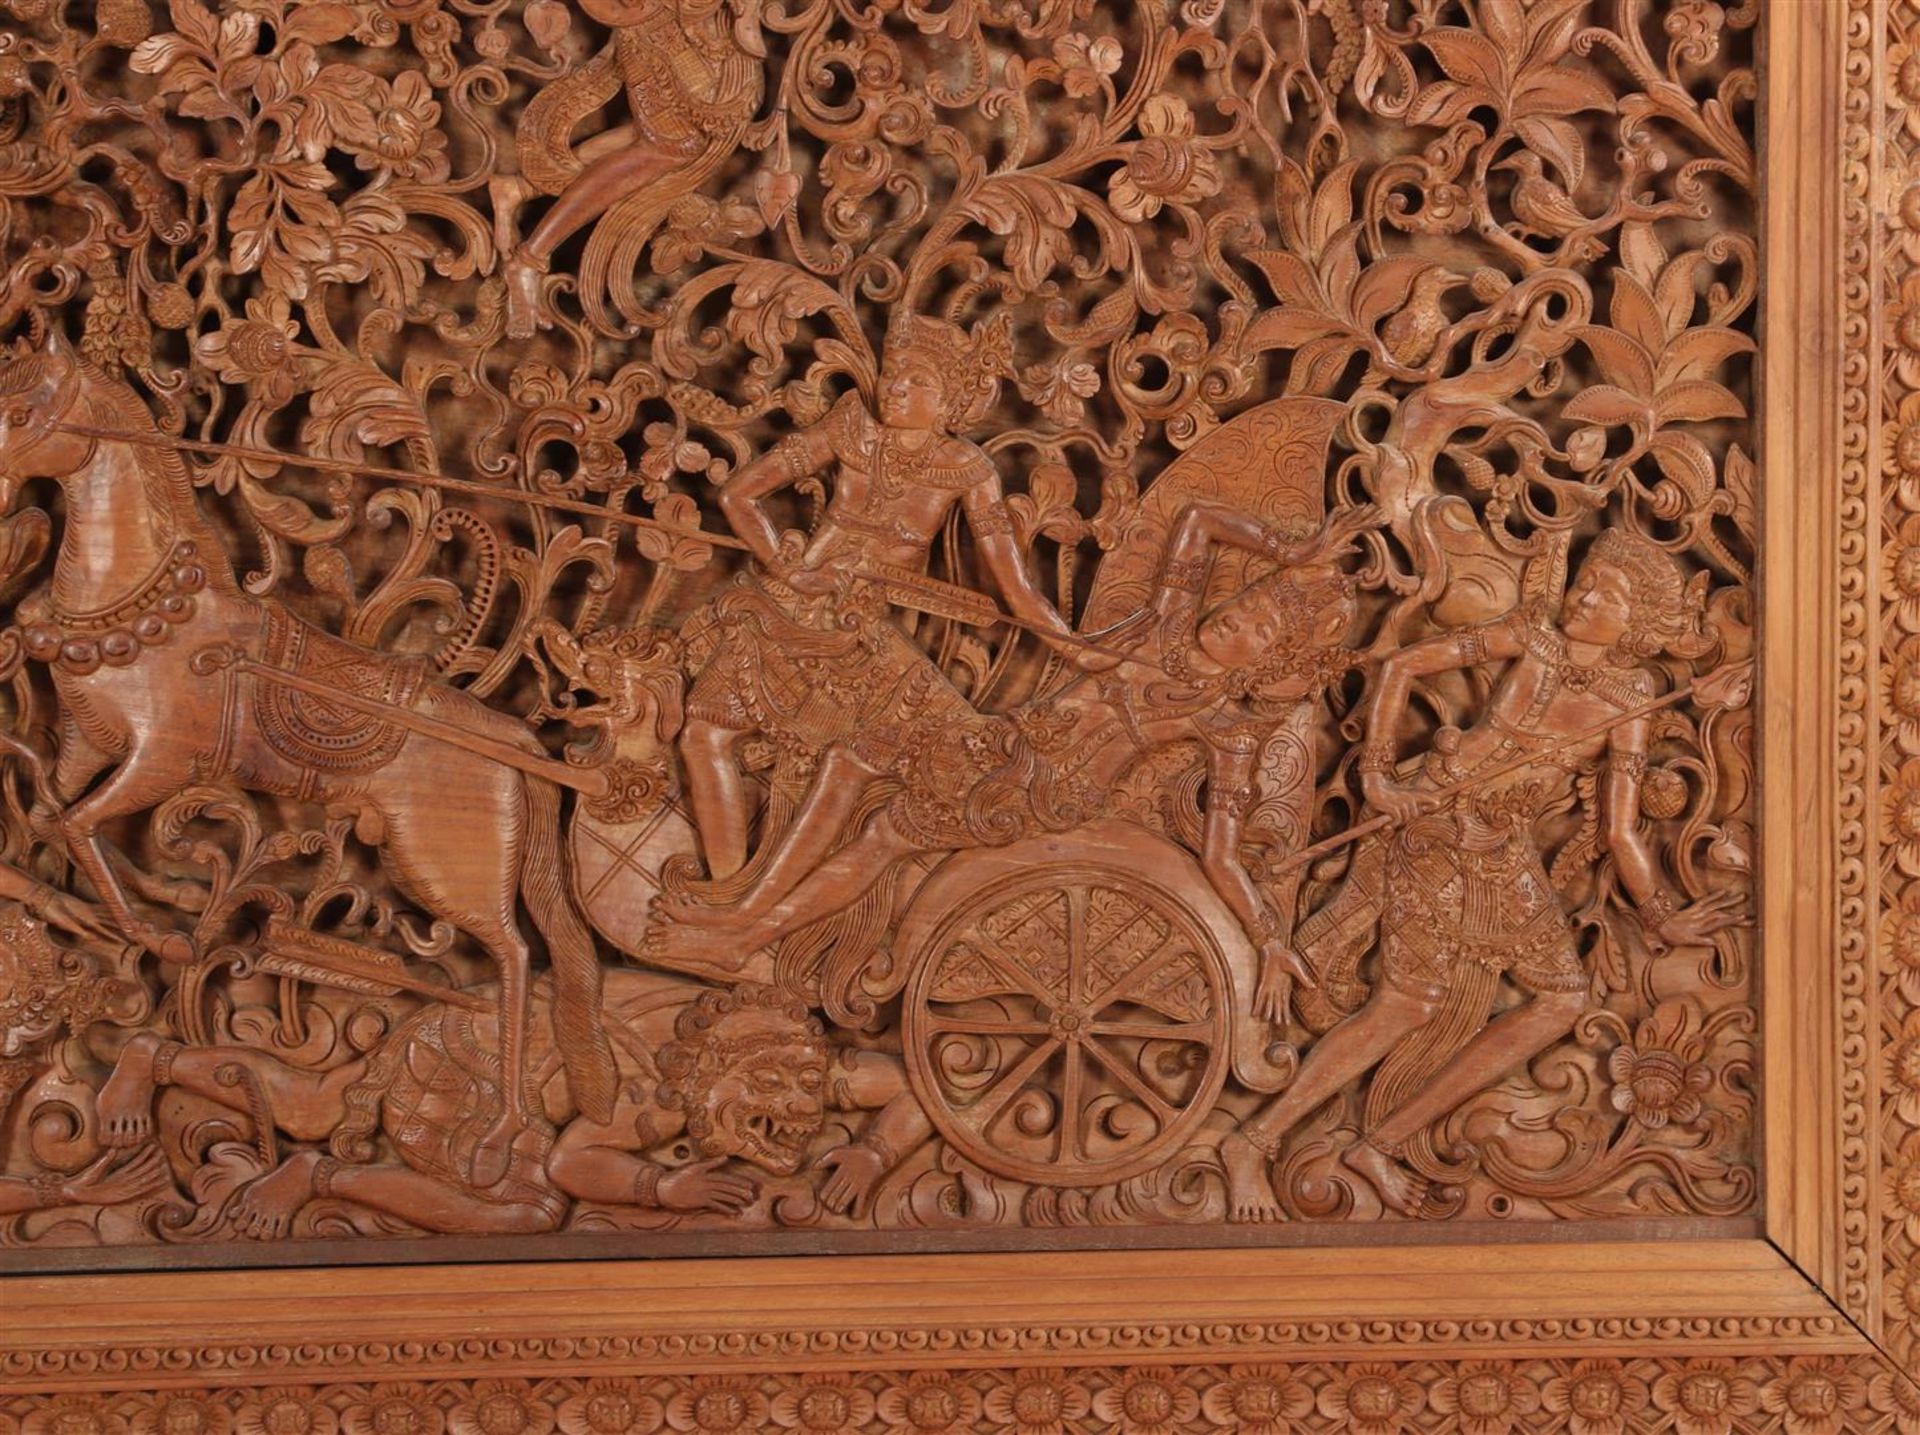 Wooden ornate wall decoration - Image 5 of 6